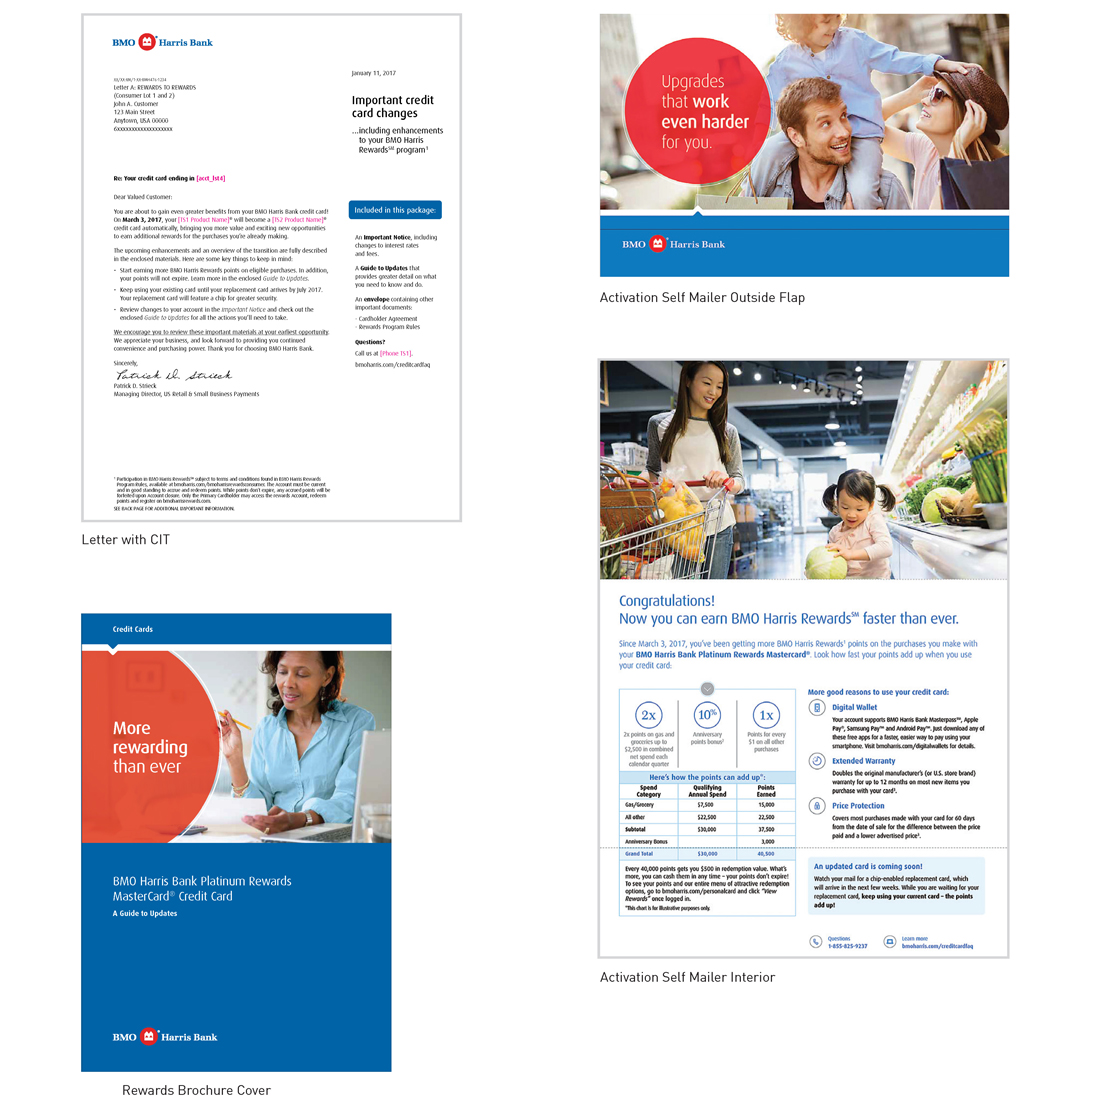 BMO Harris Bank rewards brochure cover, CIT letter, and activation self-mailer outer flap and inside content